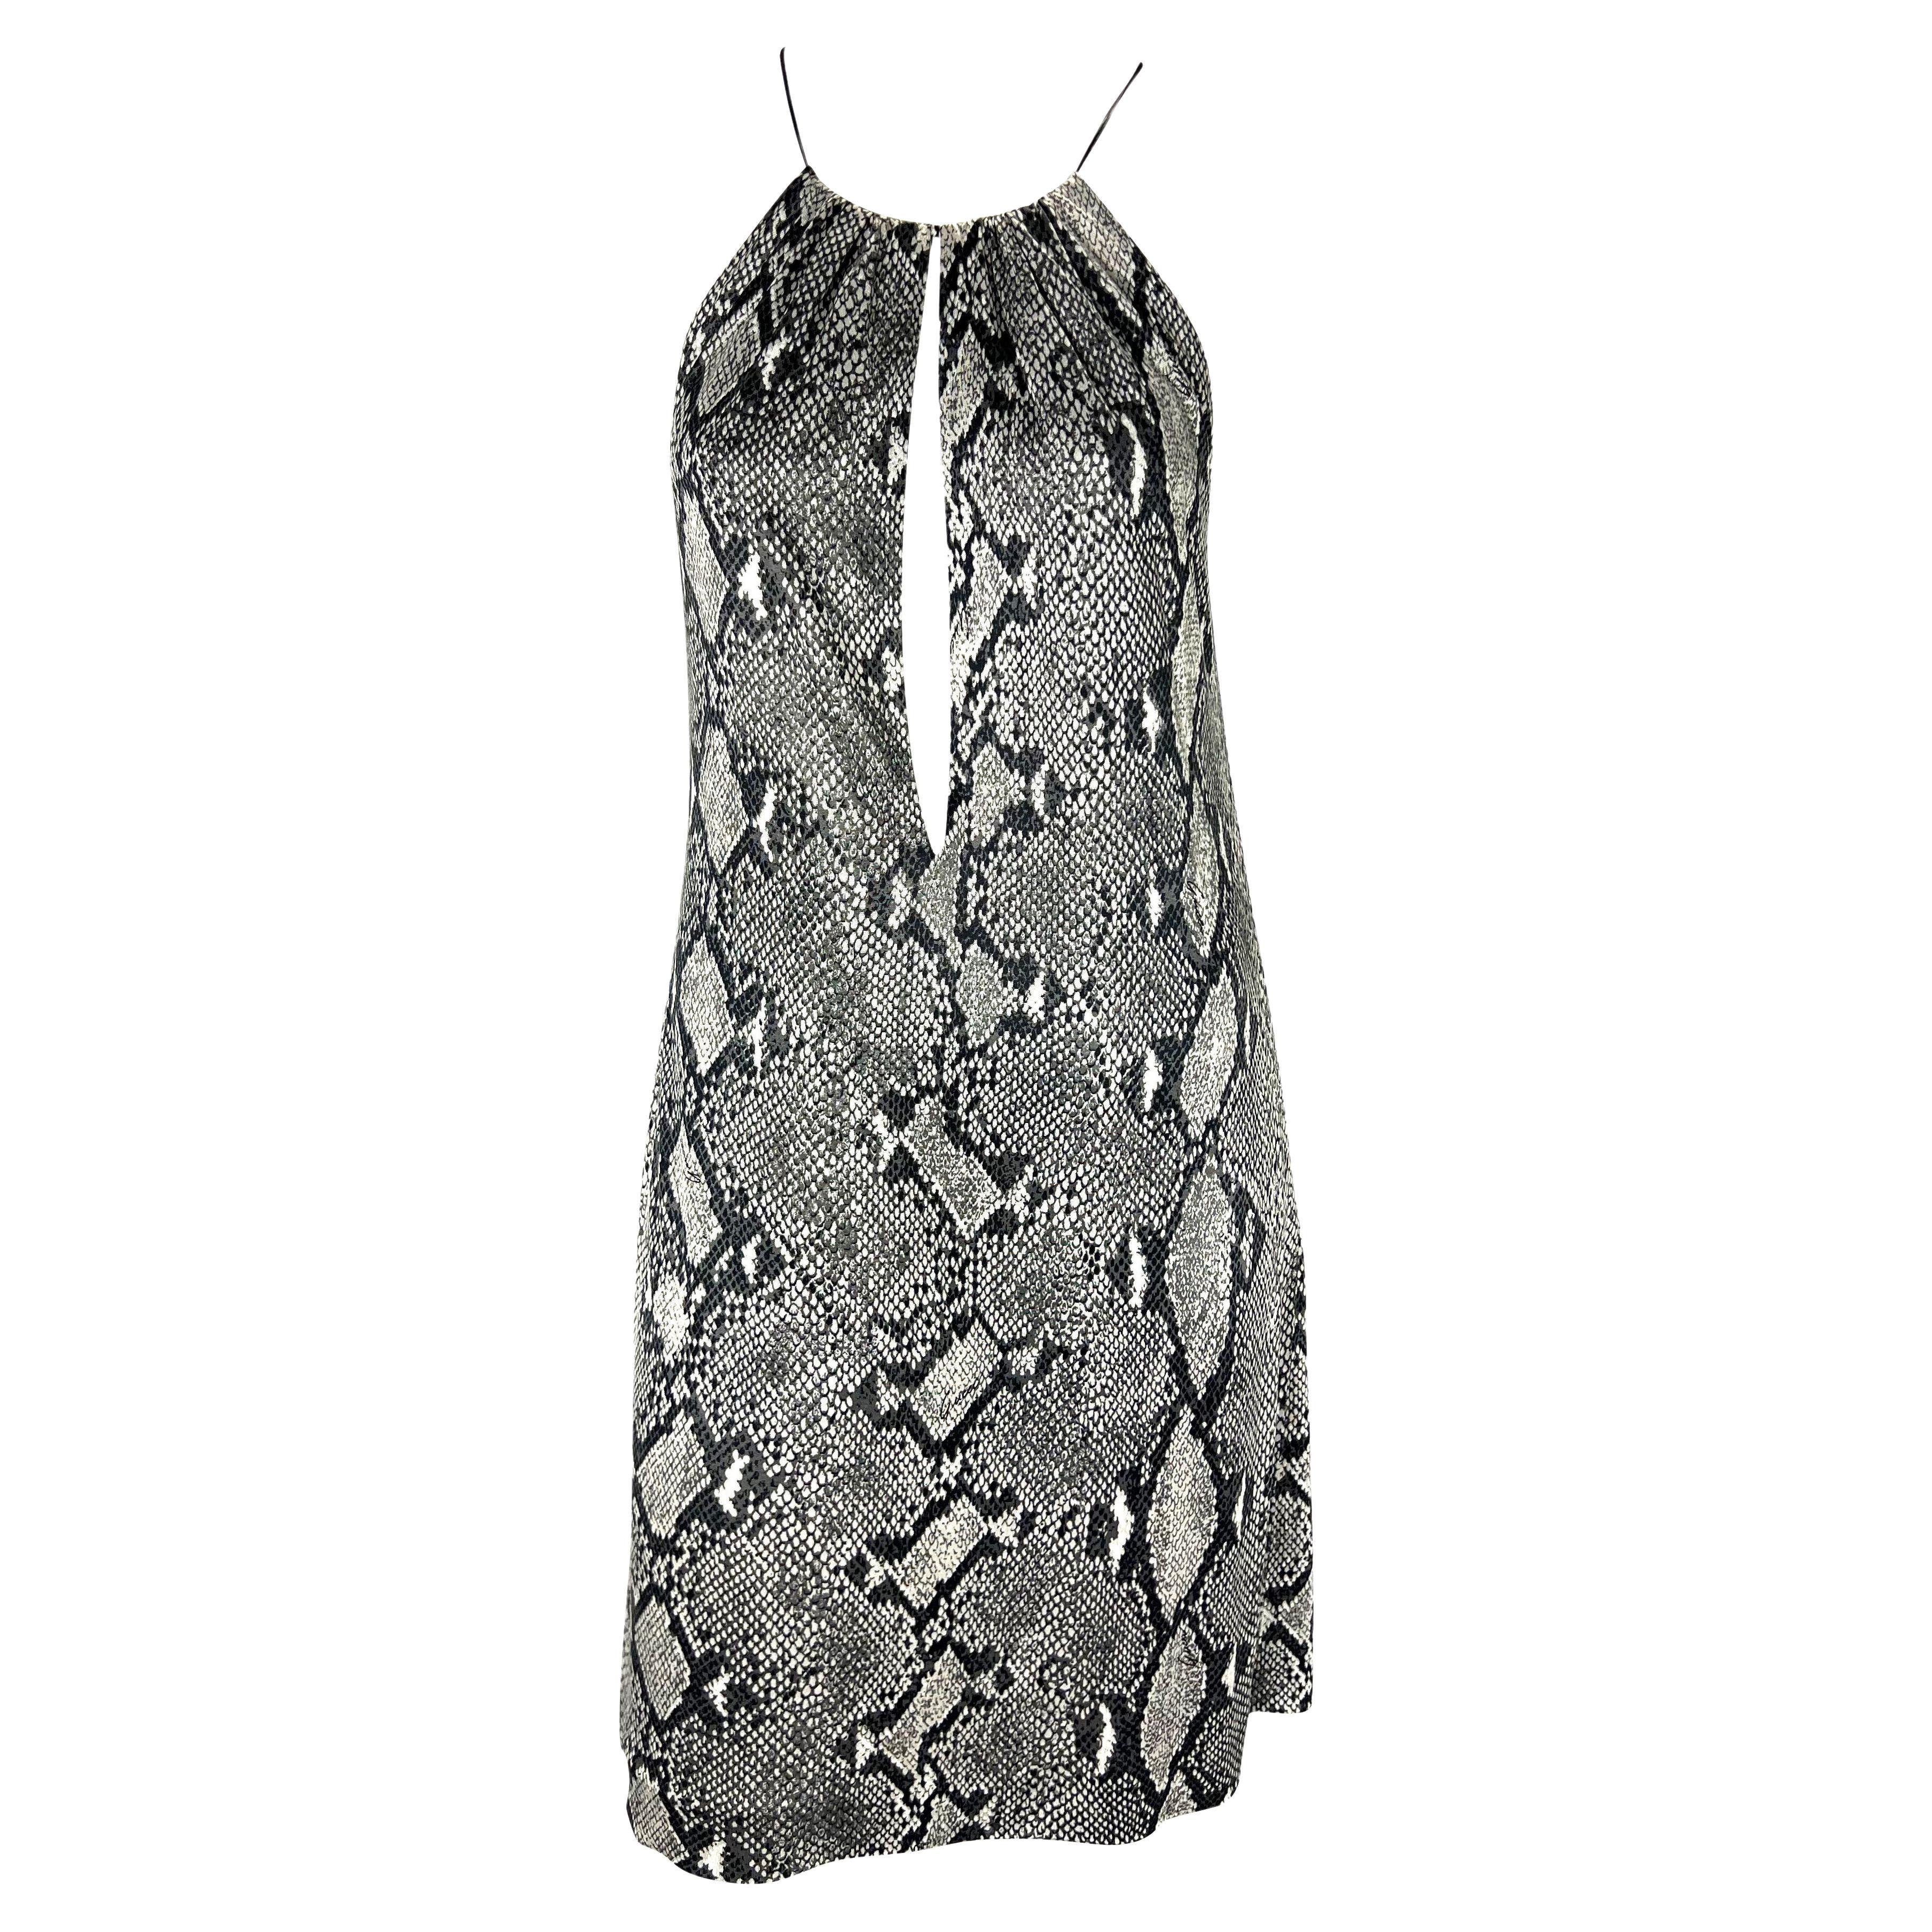 S/S 2000 Gucci by Tom Ford Snake Print Viscose Leather Strap Plunging Dress